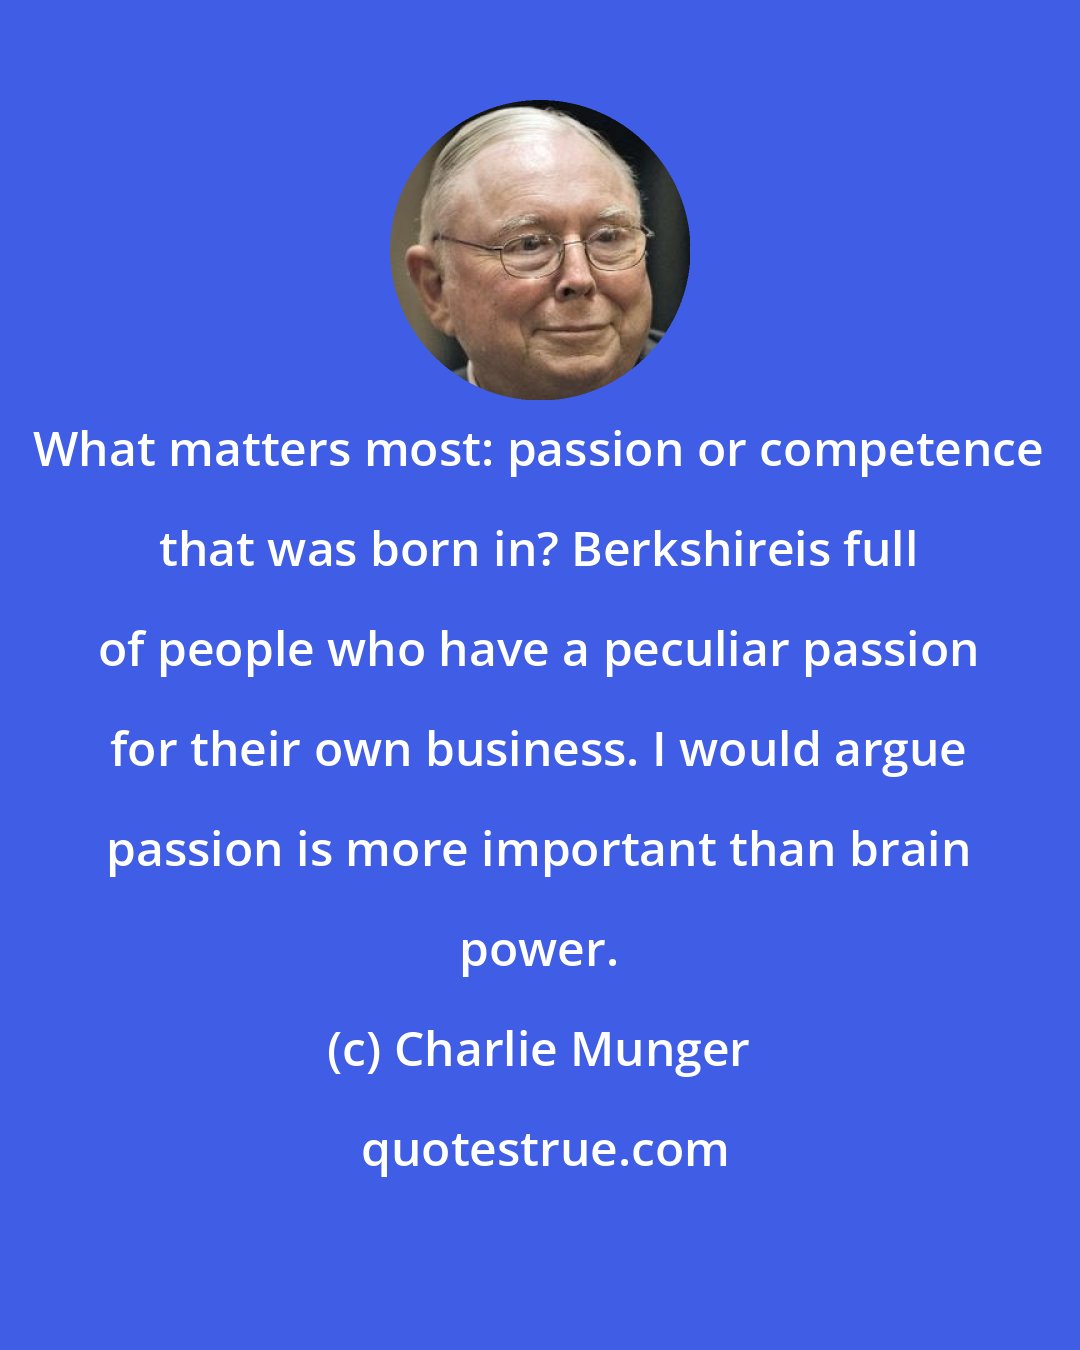 Charlie Munger: What matters most: passion or competence that was born in? Berkshireis full of people who have a peculiar passion for their own business. I would argue passion is more important than brain power.